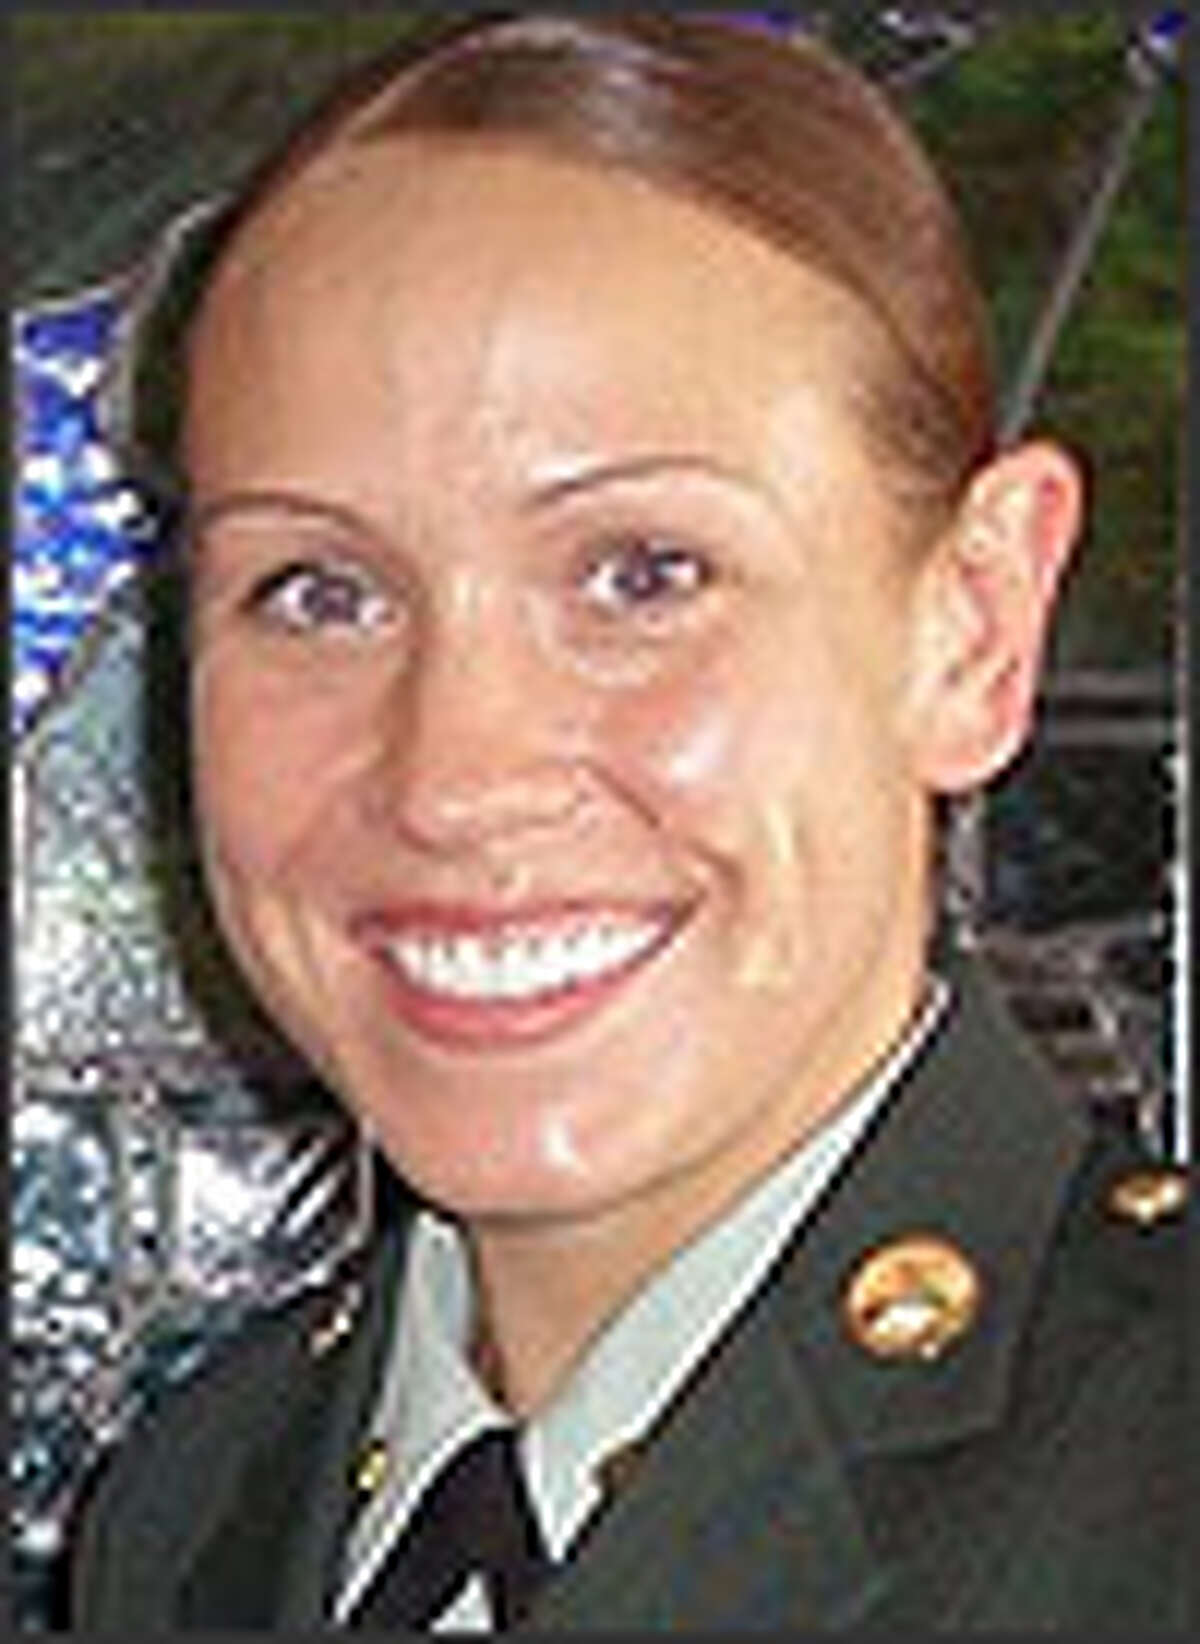 Sgt. Jamiell Goforth left a dance career for the Army.